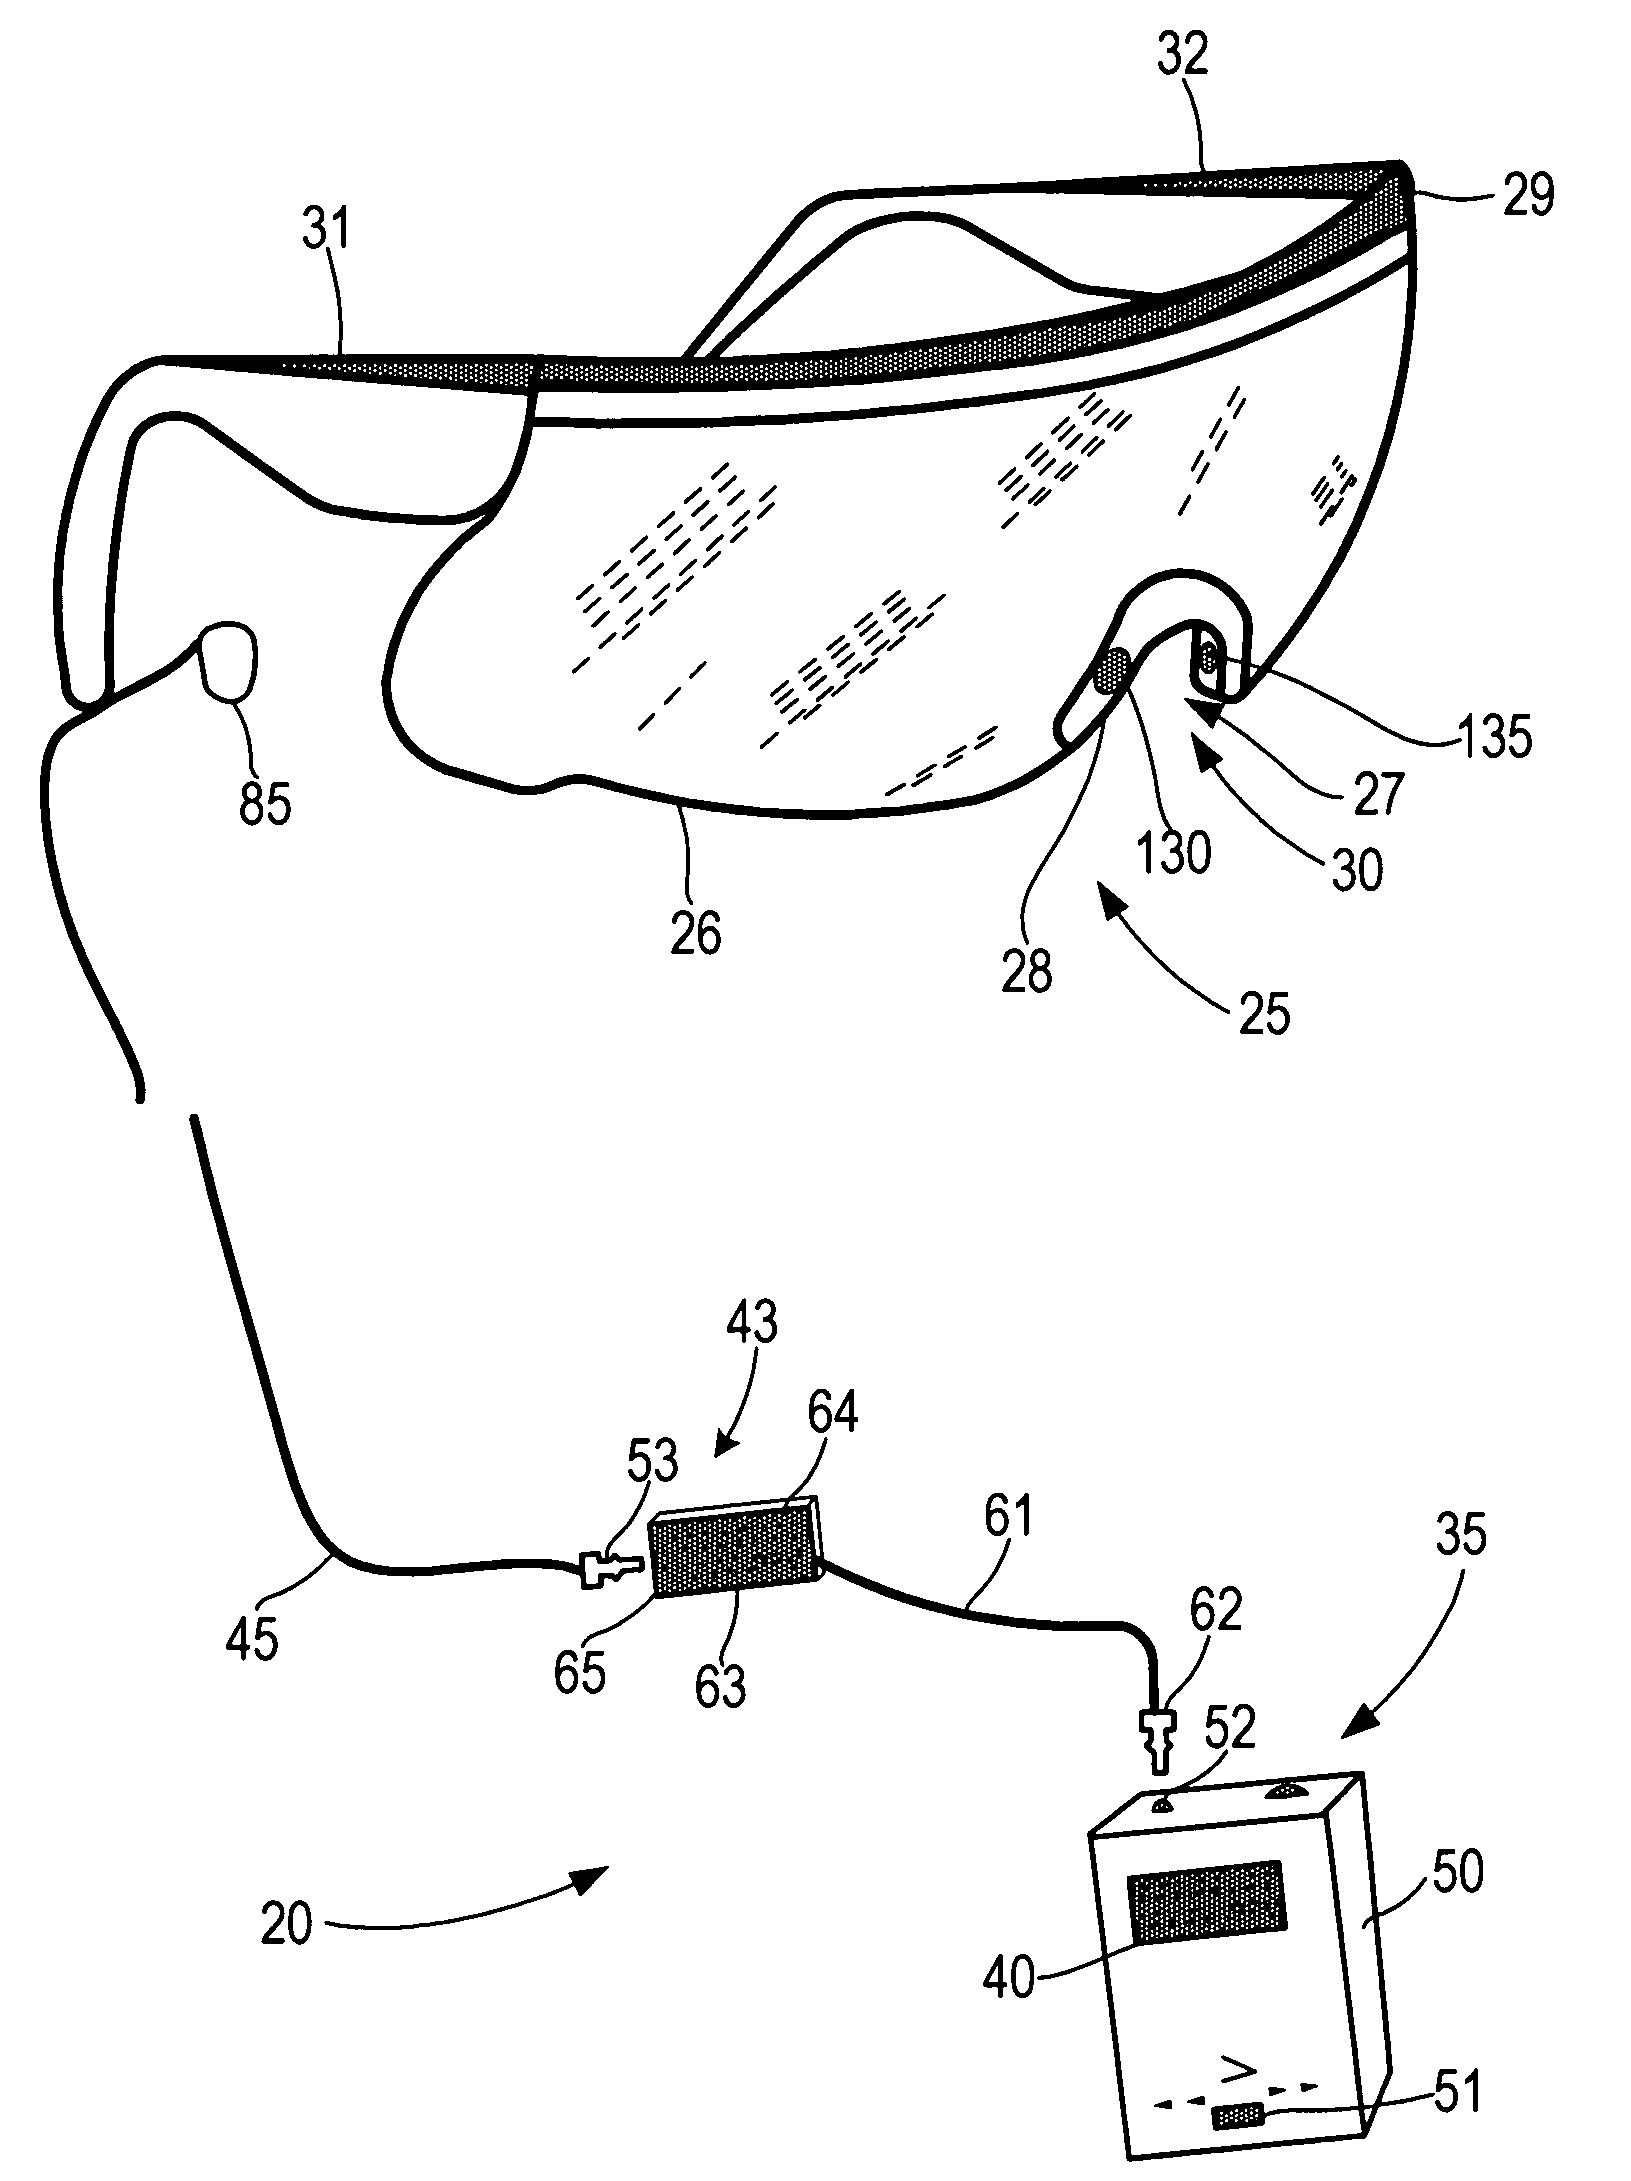 Monitoring device, method and system